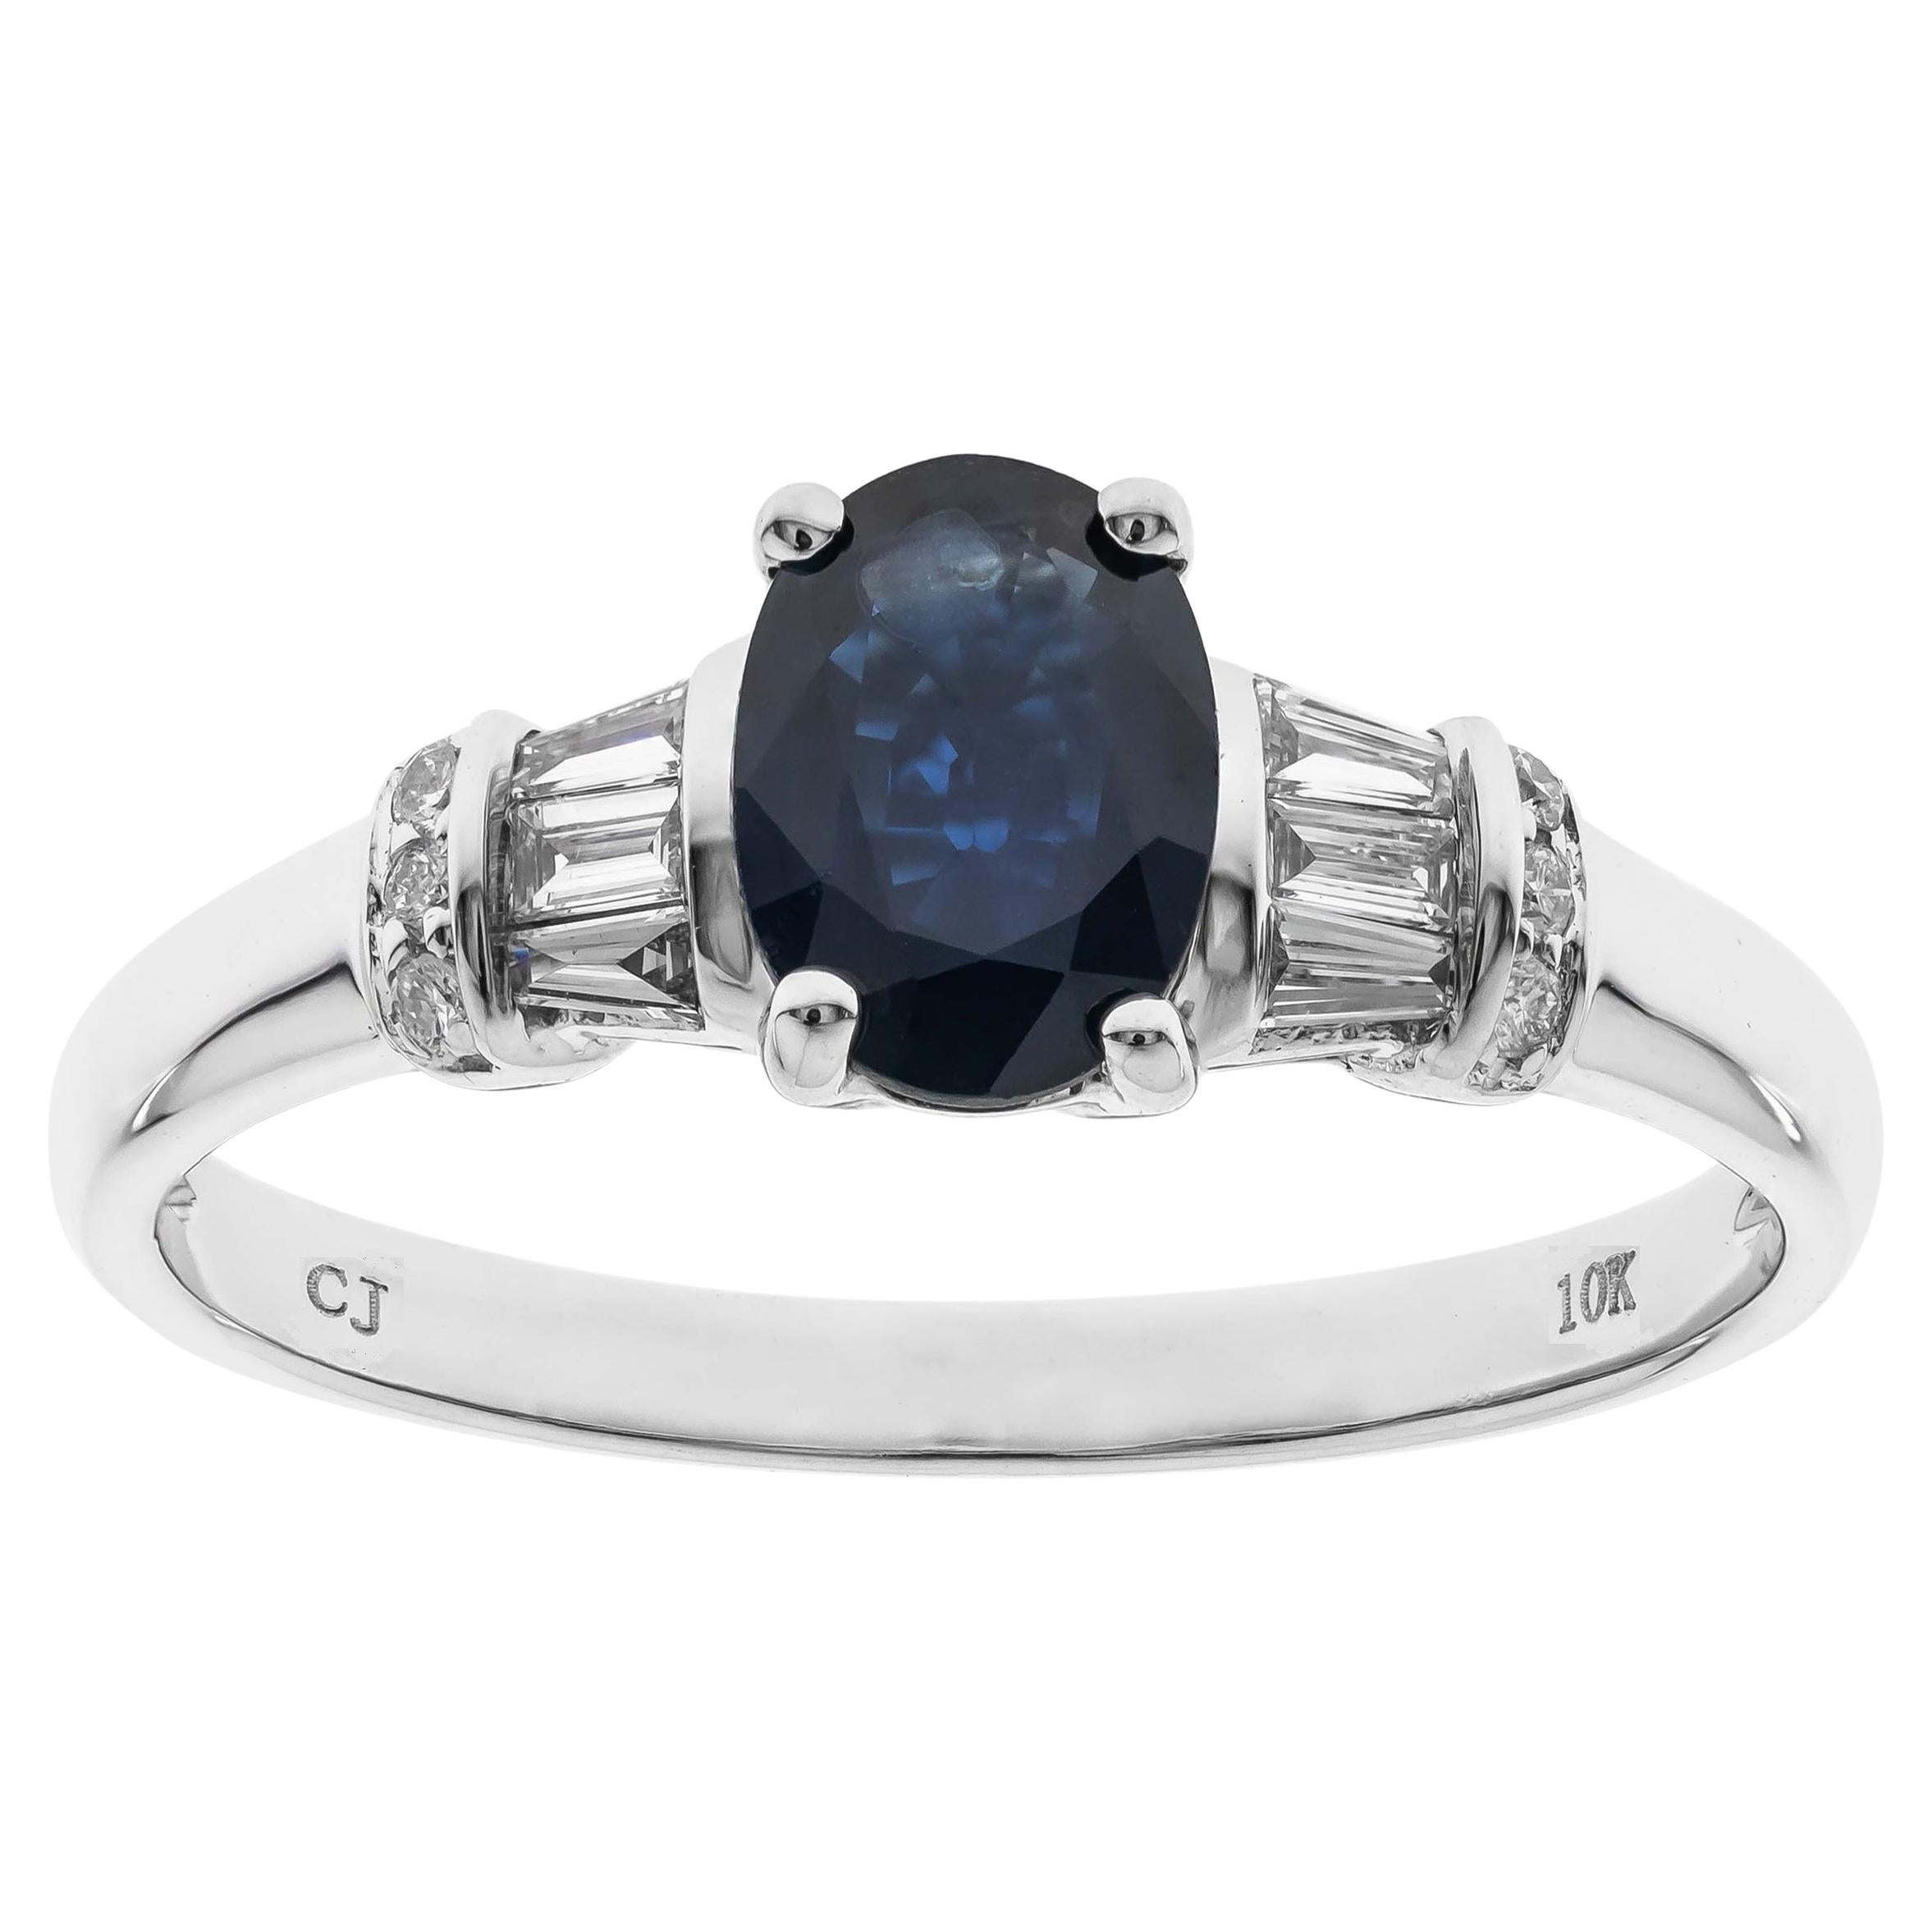 0.94 Carat Oval-Cut Blue Sapphire Diamond Accents 10K White Gold Ring